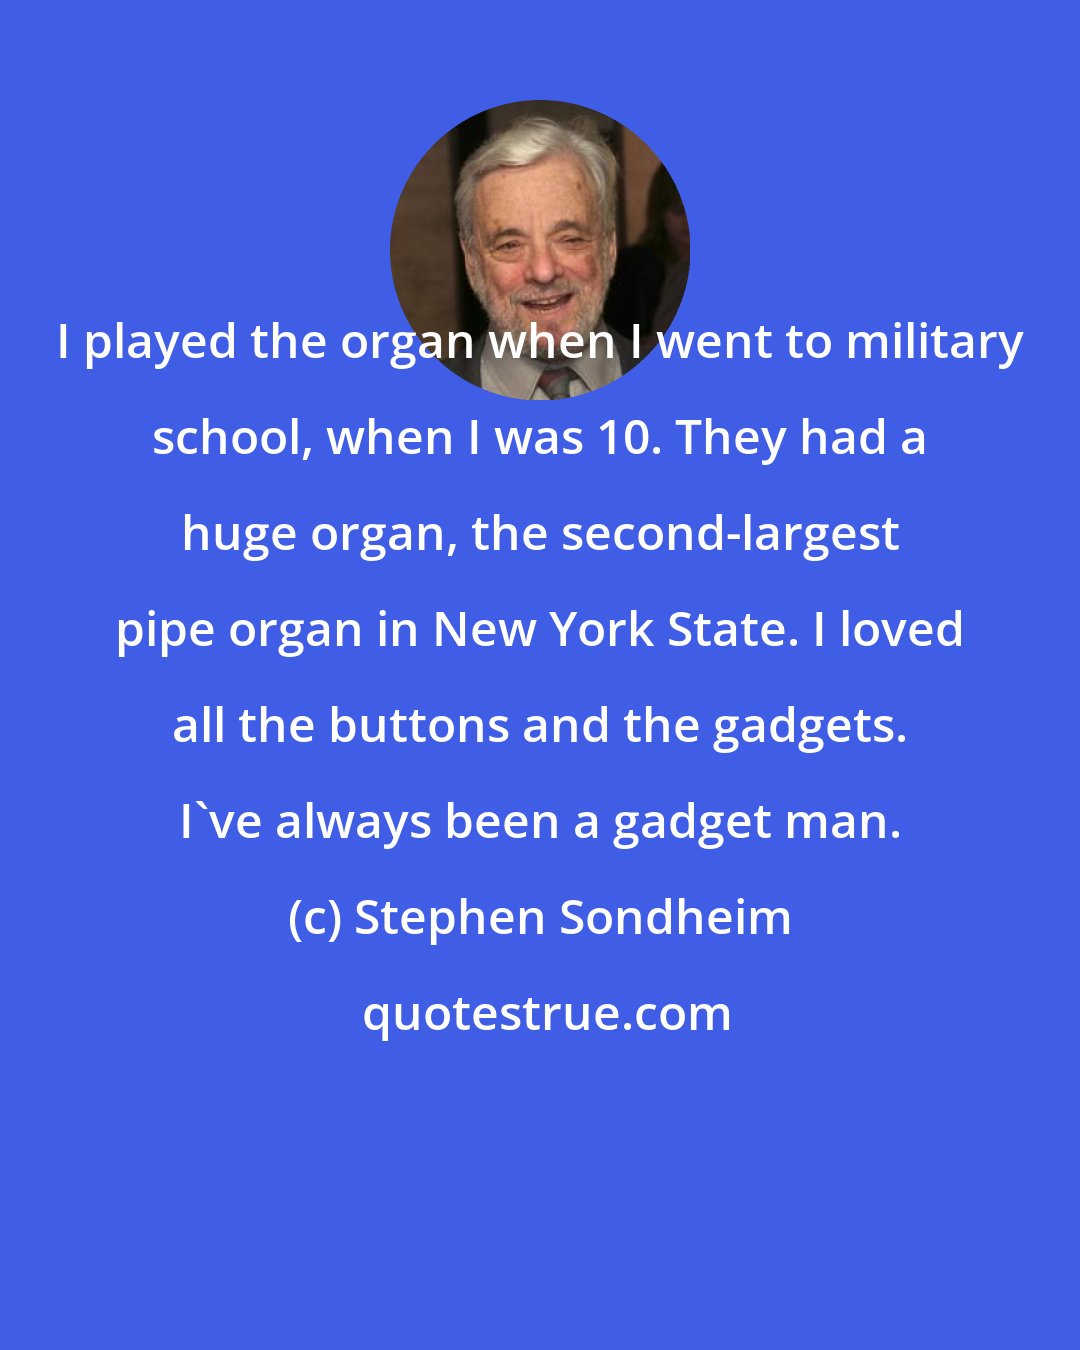 Stephen Sondheim: I played the organ when I went to military school, when I was 10. They had a huge organ, the second-largest pipe organ in New York State. I loved all the buttons and the gadgets. I've always been a gadget man.